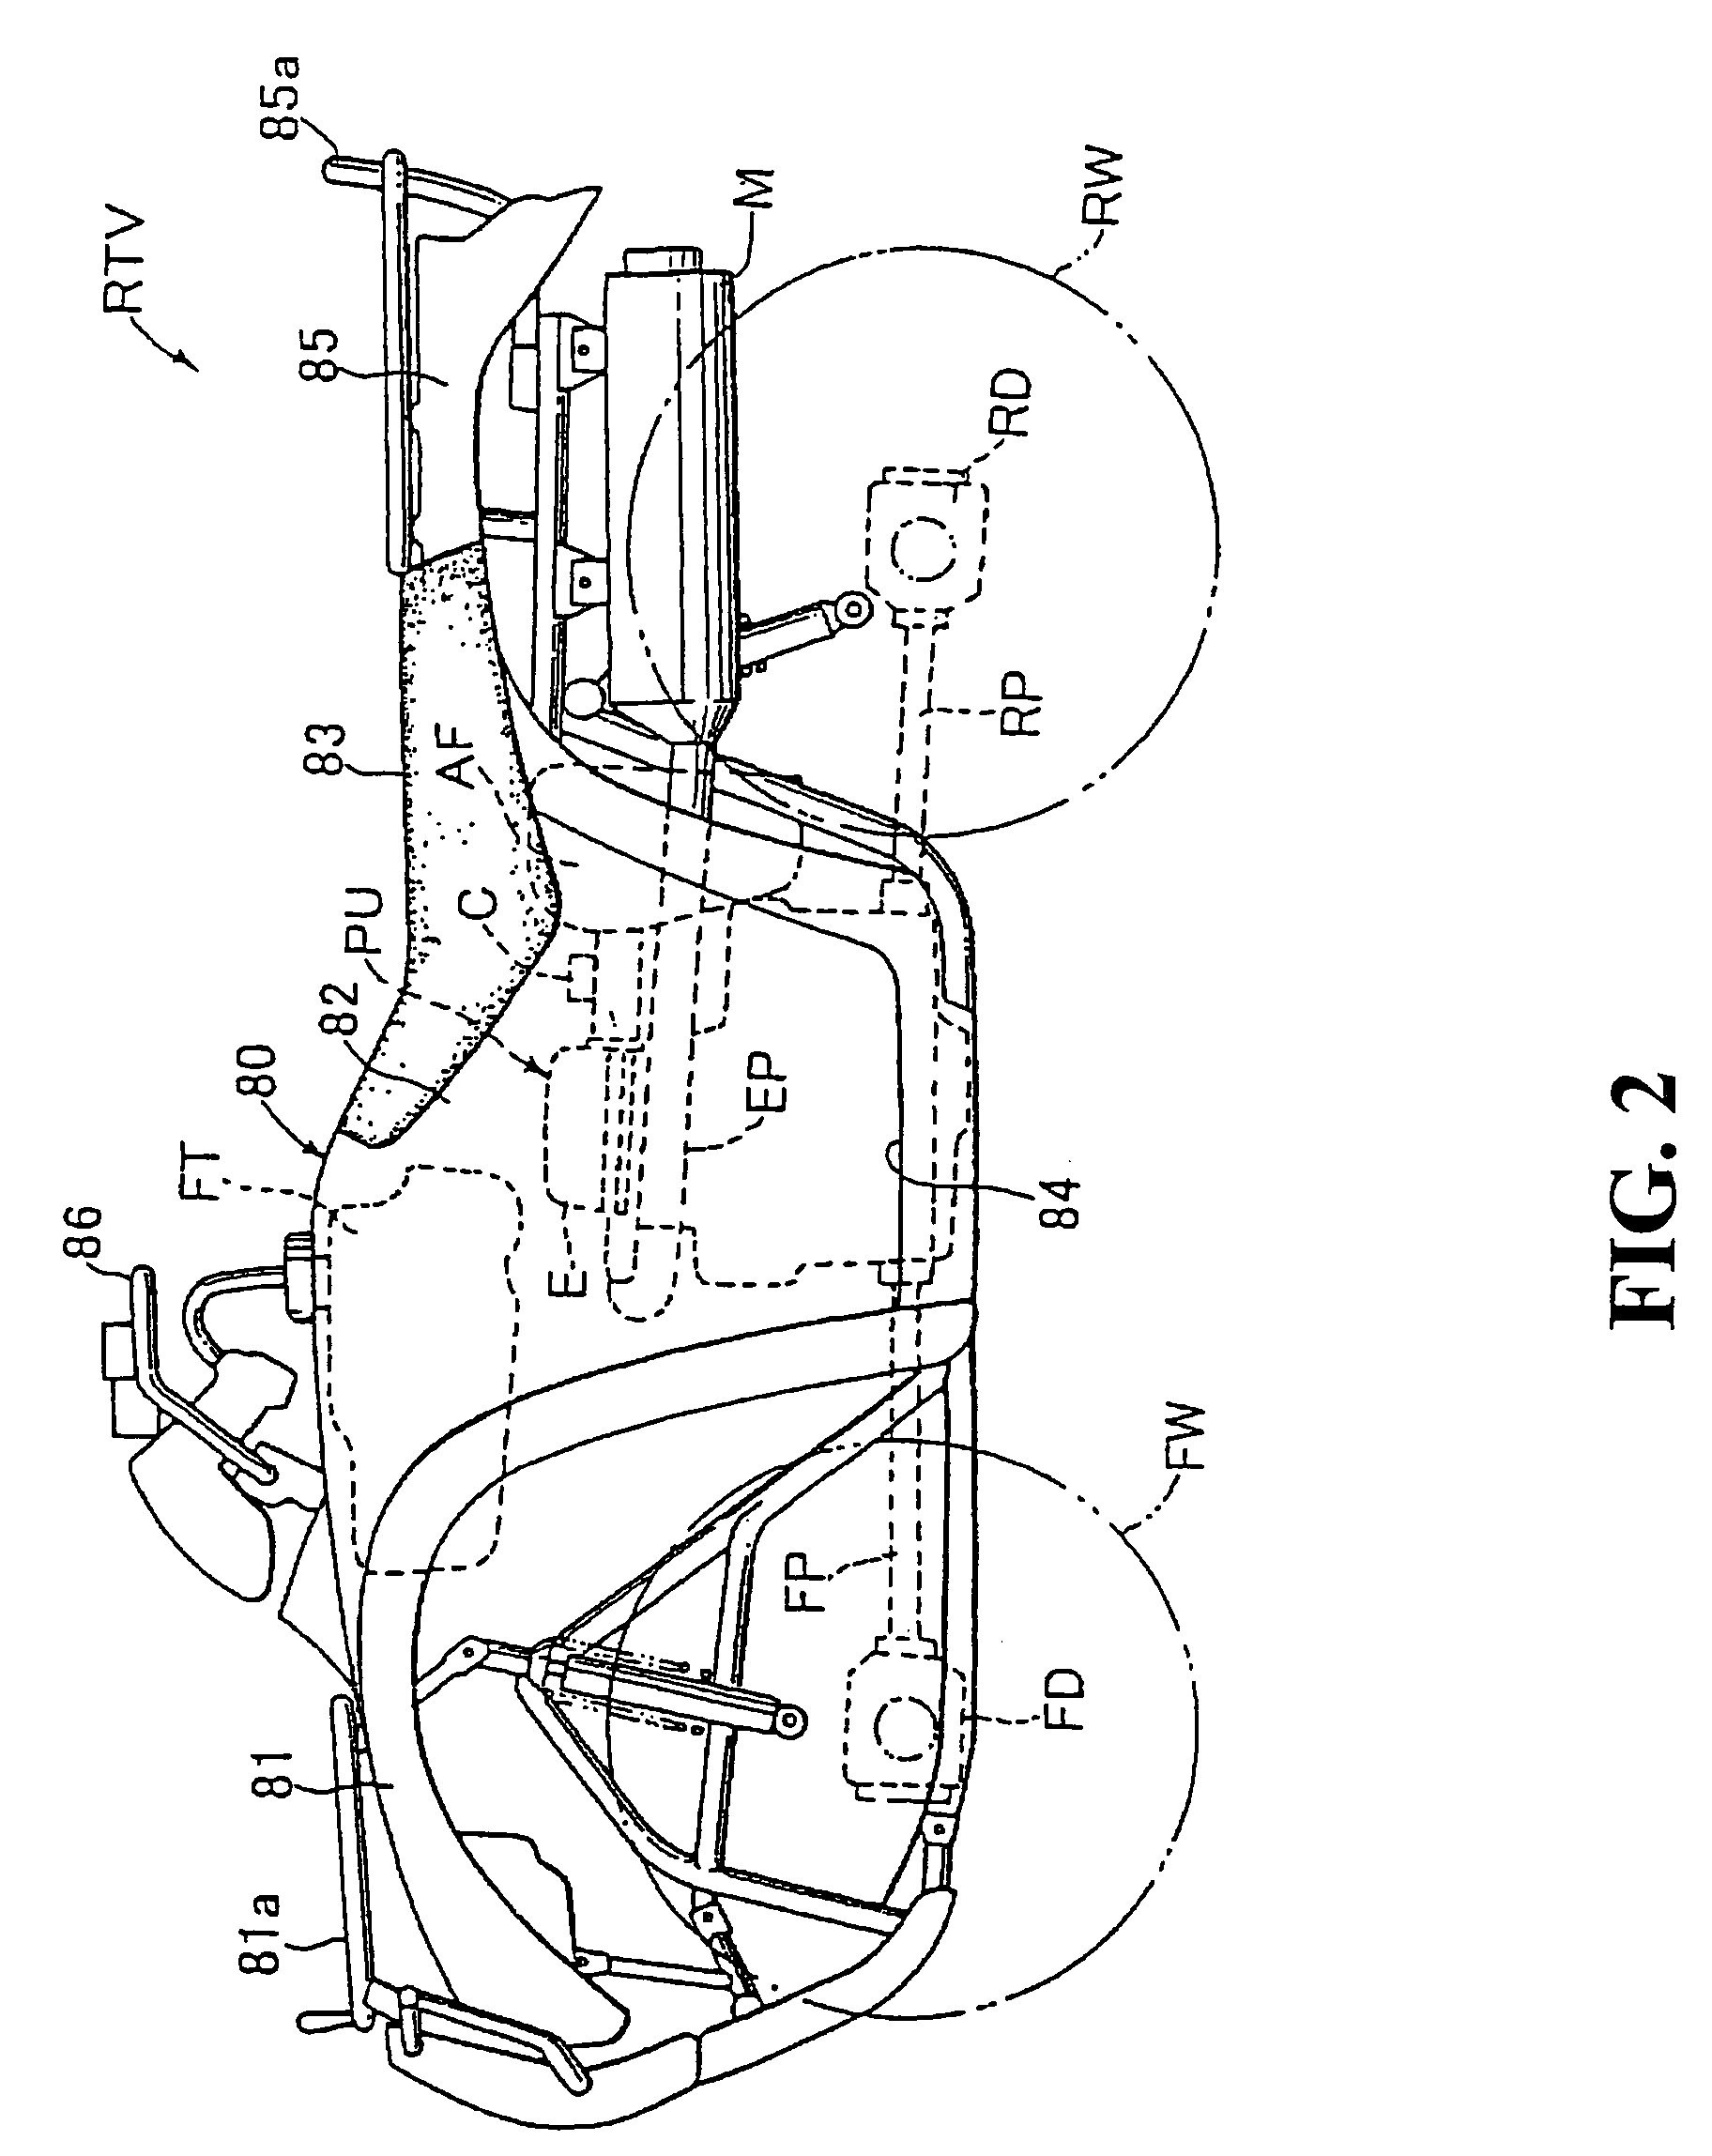 Shift position detection apparatus for variable speed gear